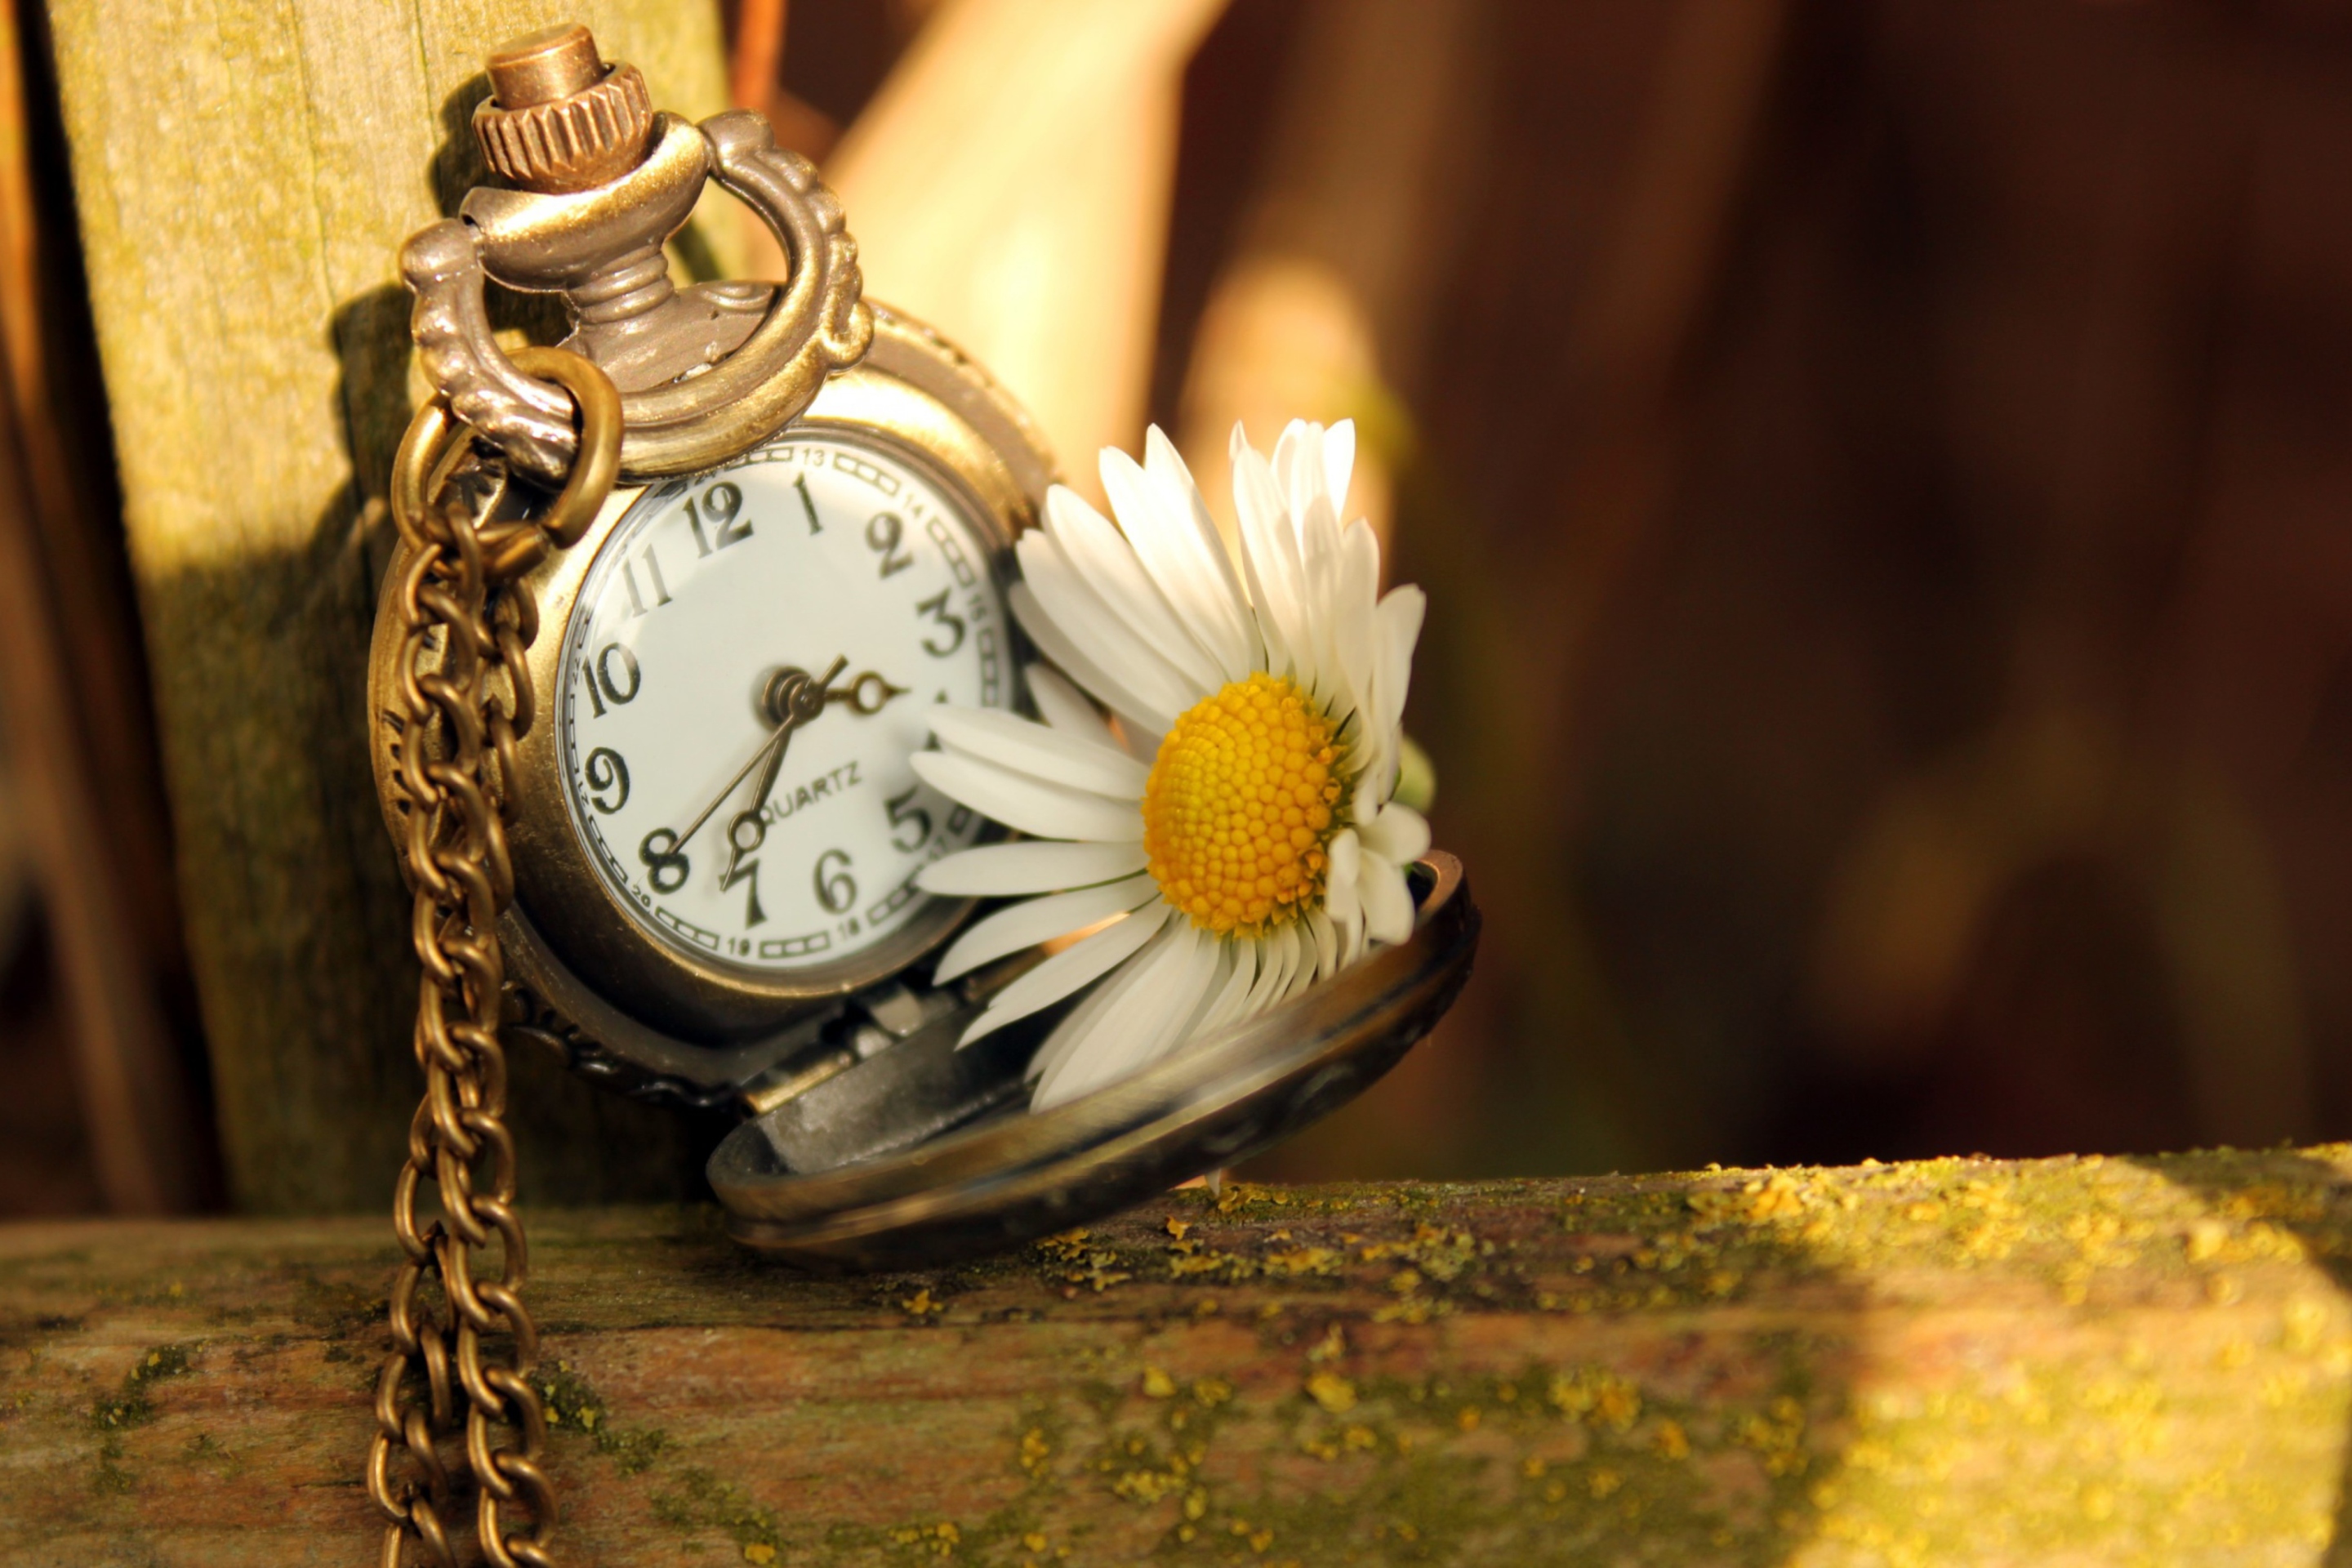 Vintage Watch And Daisy wallpaper 2880x1920